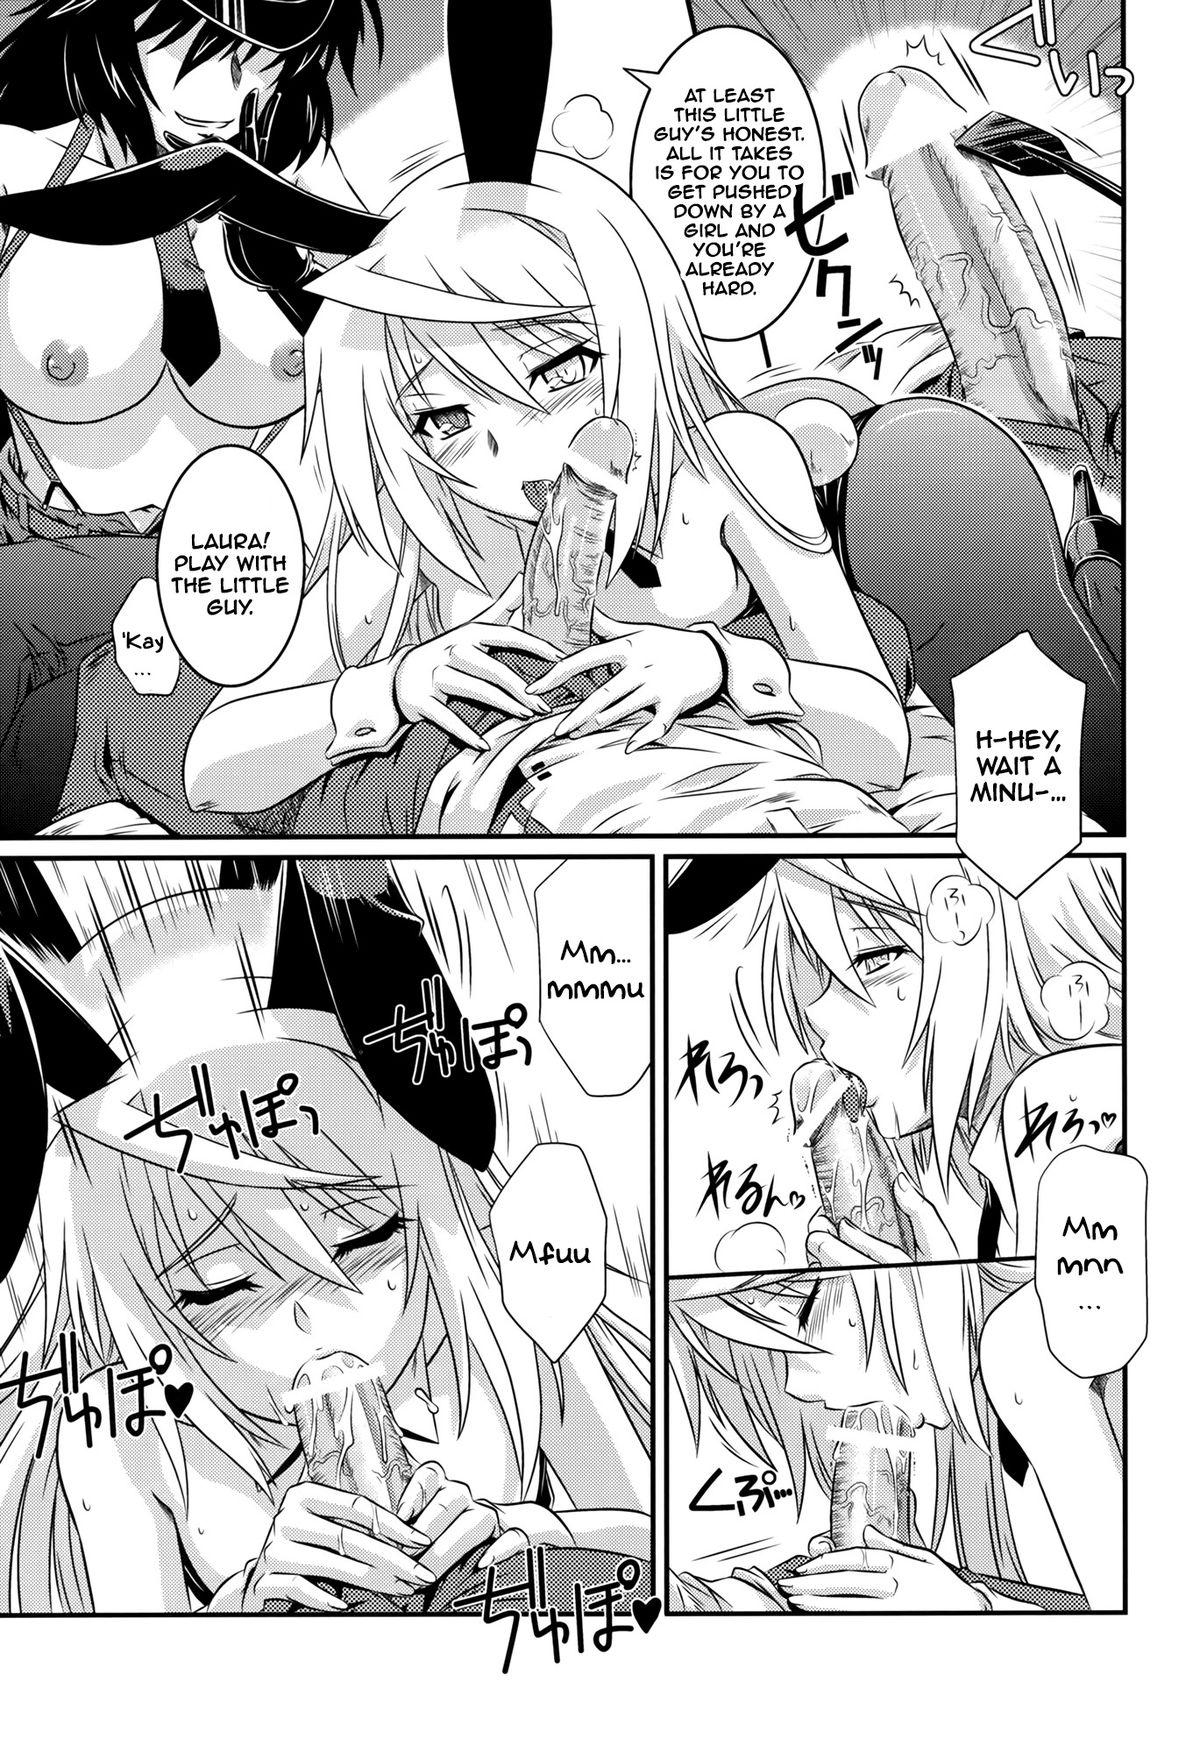 Dicksucking is Incest Strategy 4 - Infinite stratos Webcams - Page 6